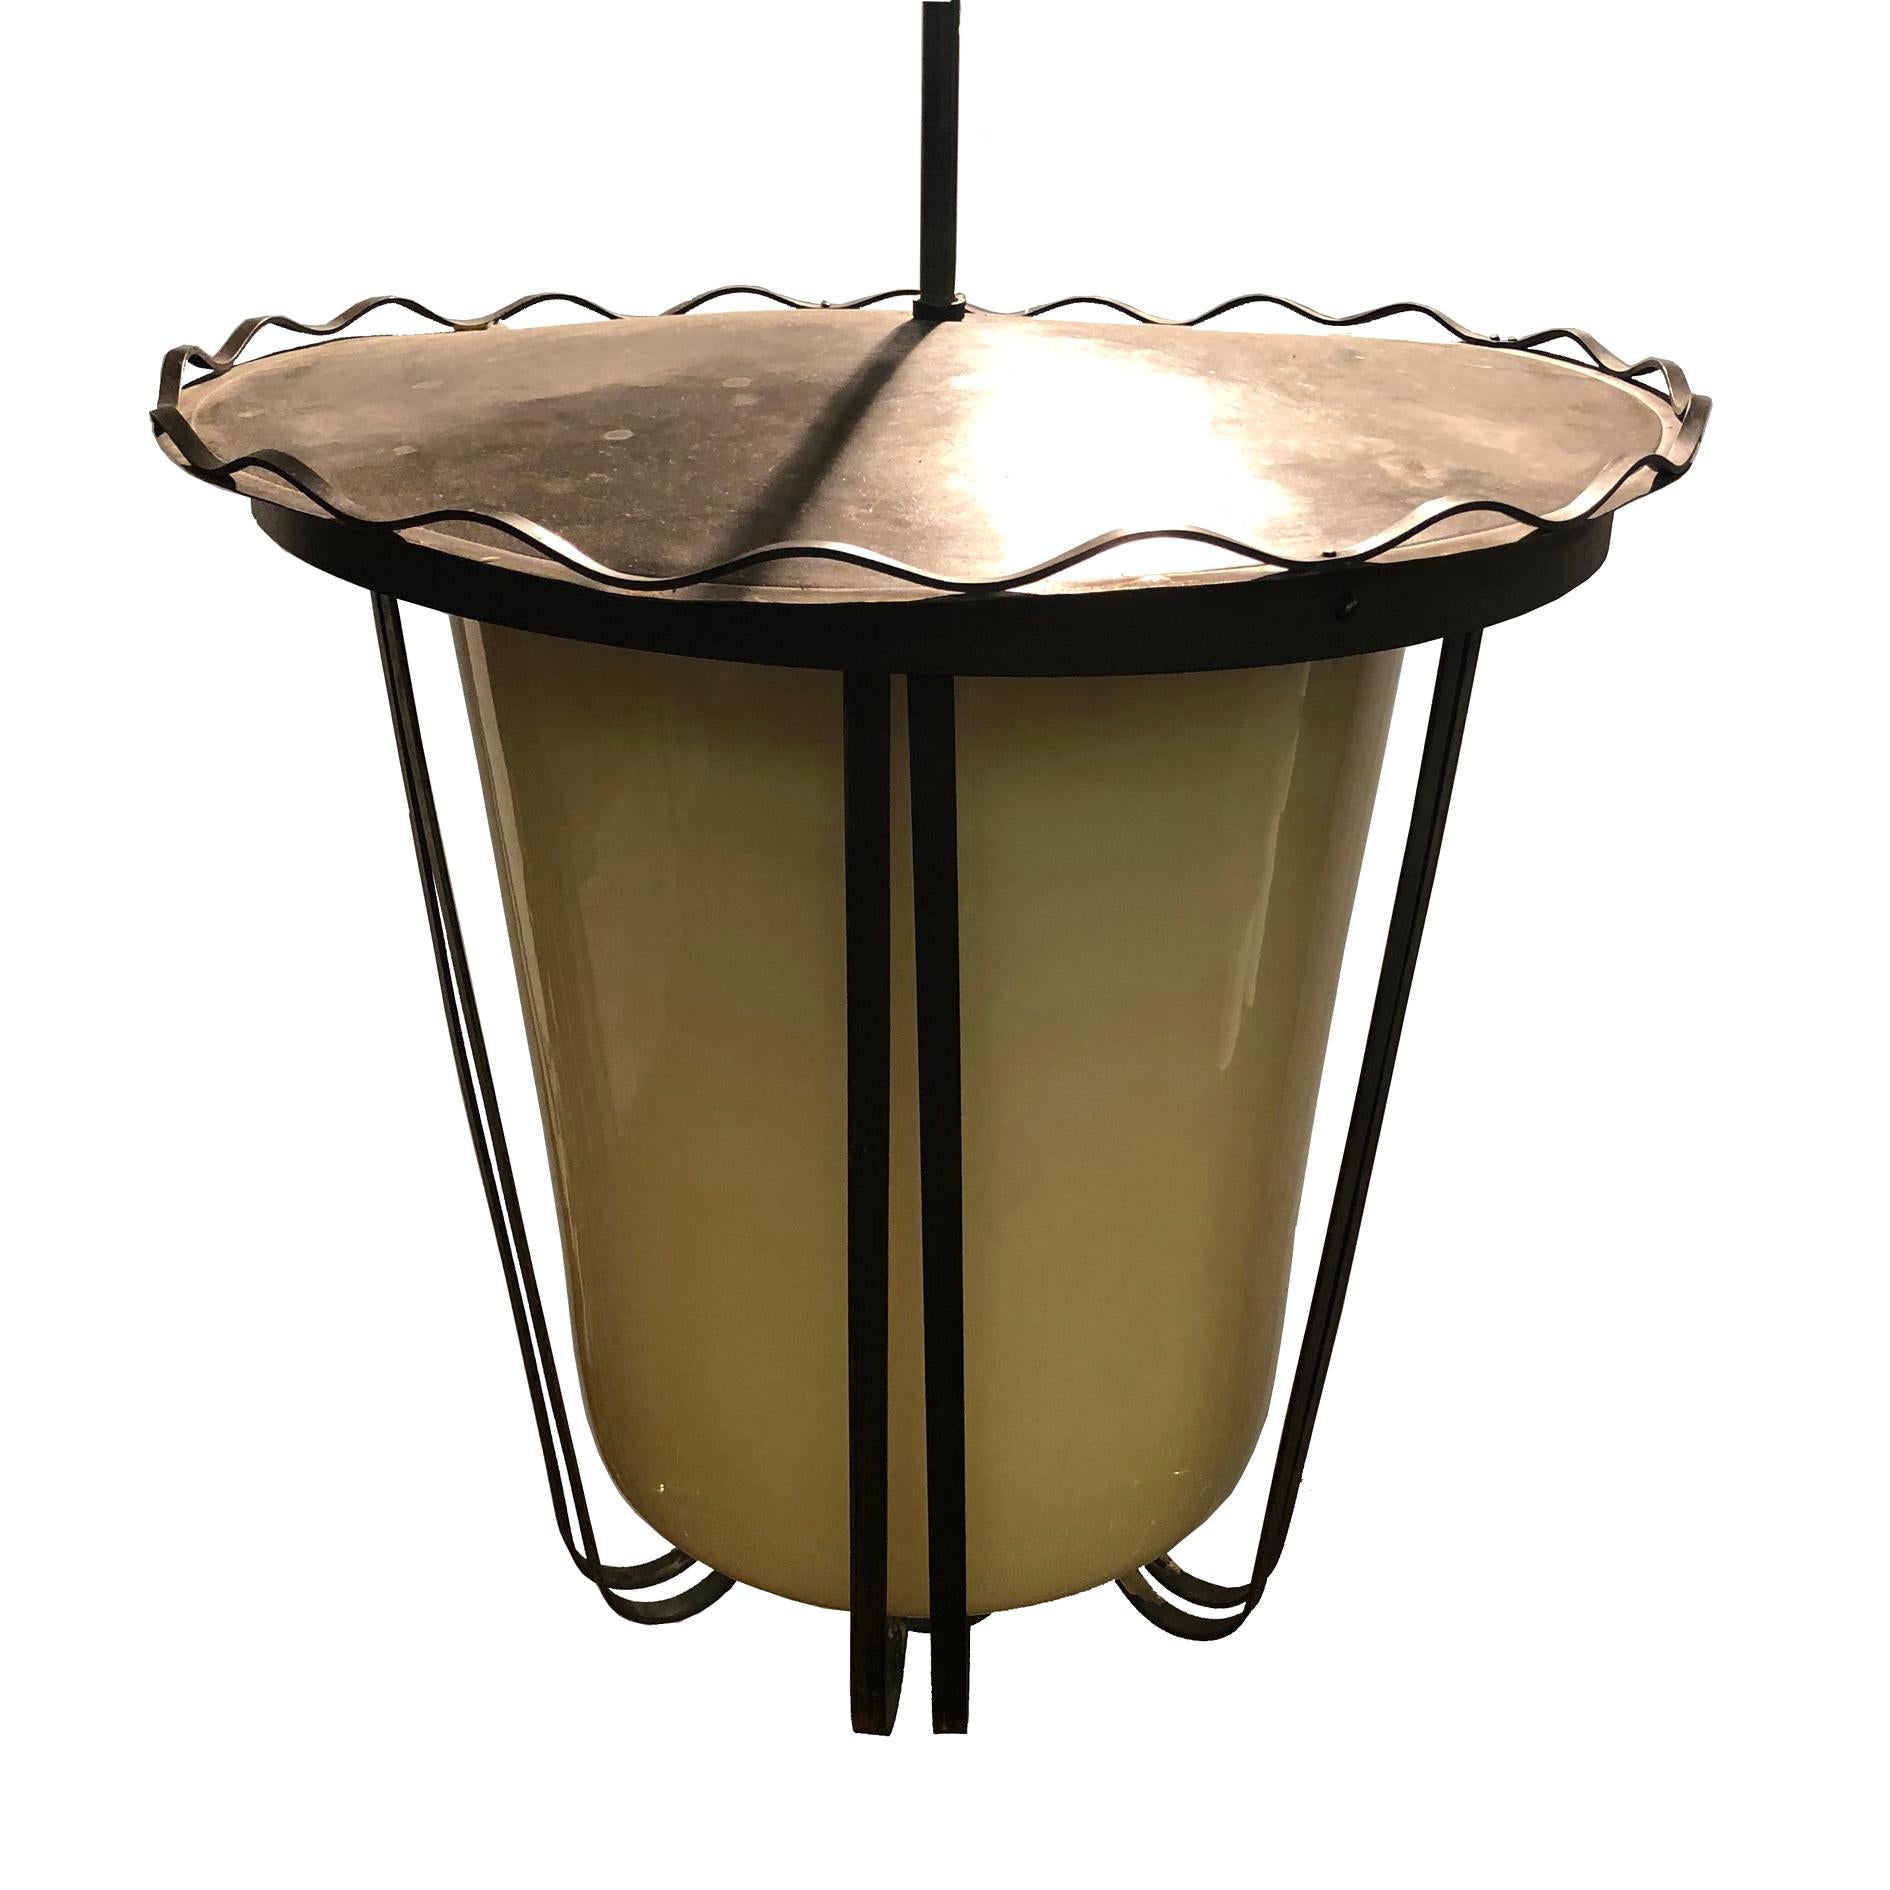 Very nice 1940s brass and glass lantern or pendant.
Hand blown Murano encased cylindrical, tapered glass diffuser in opaque beige- yellowish glass.
Very nice original condition with original period patina on brass.
Fully working and tested